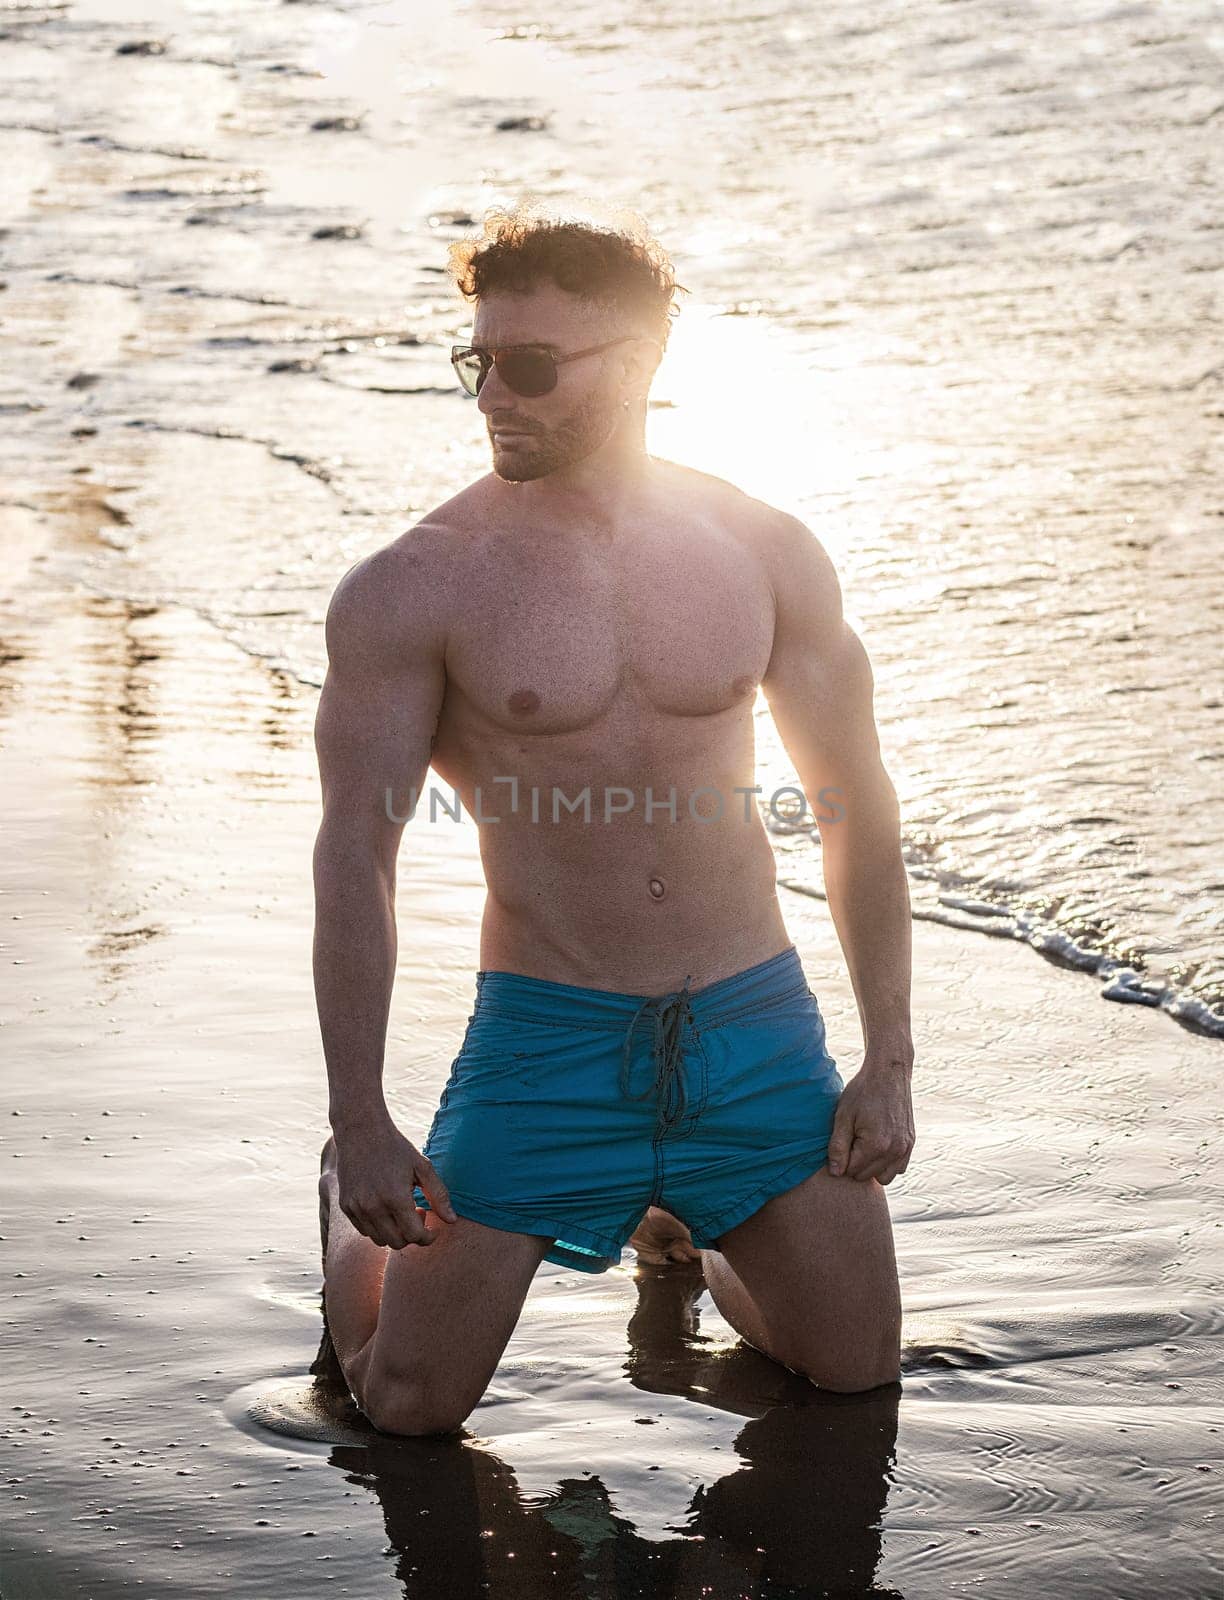 Attractive and fit young bodybuilder in bathing suit kneeling on the beach - Muscular and fit young bodybuilder in the sea